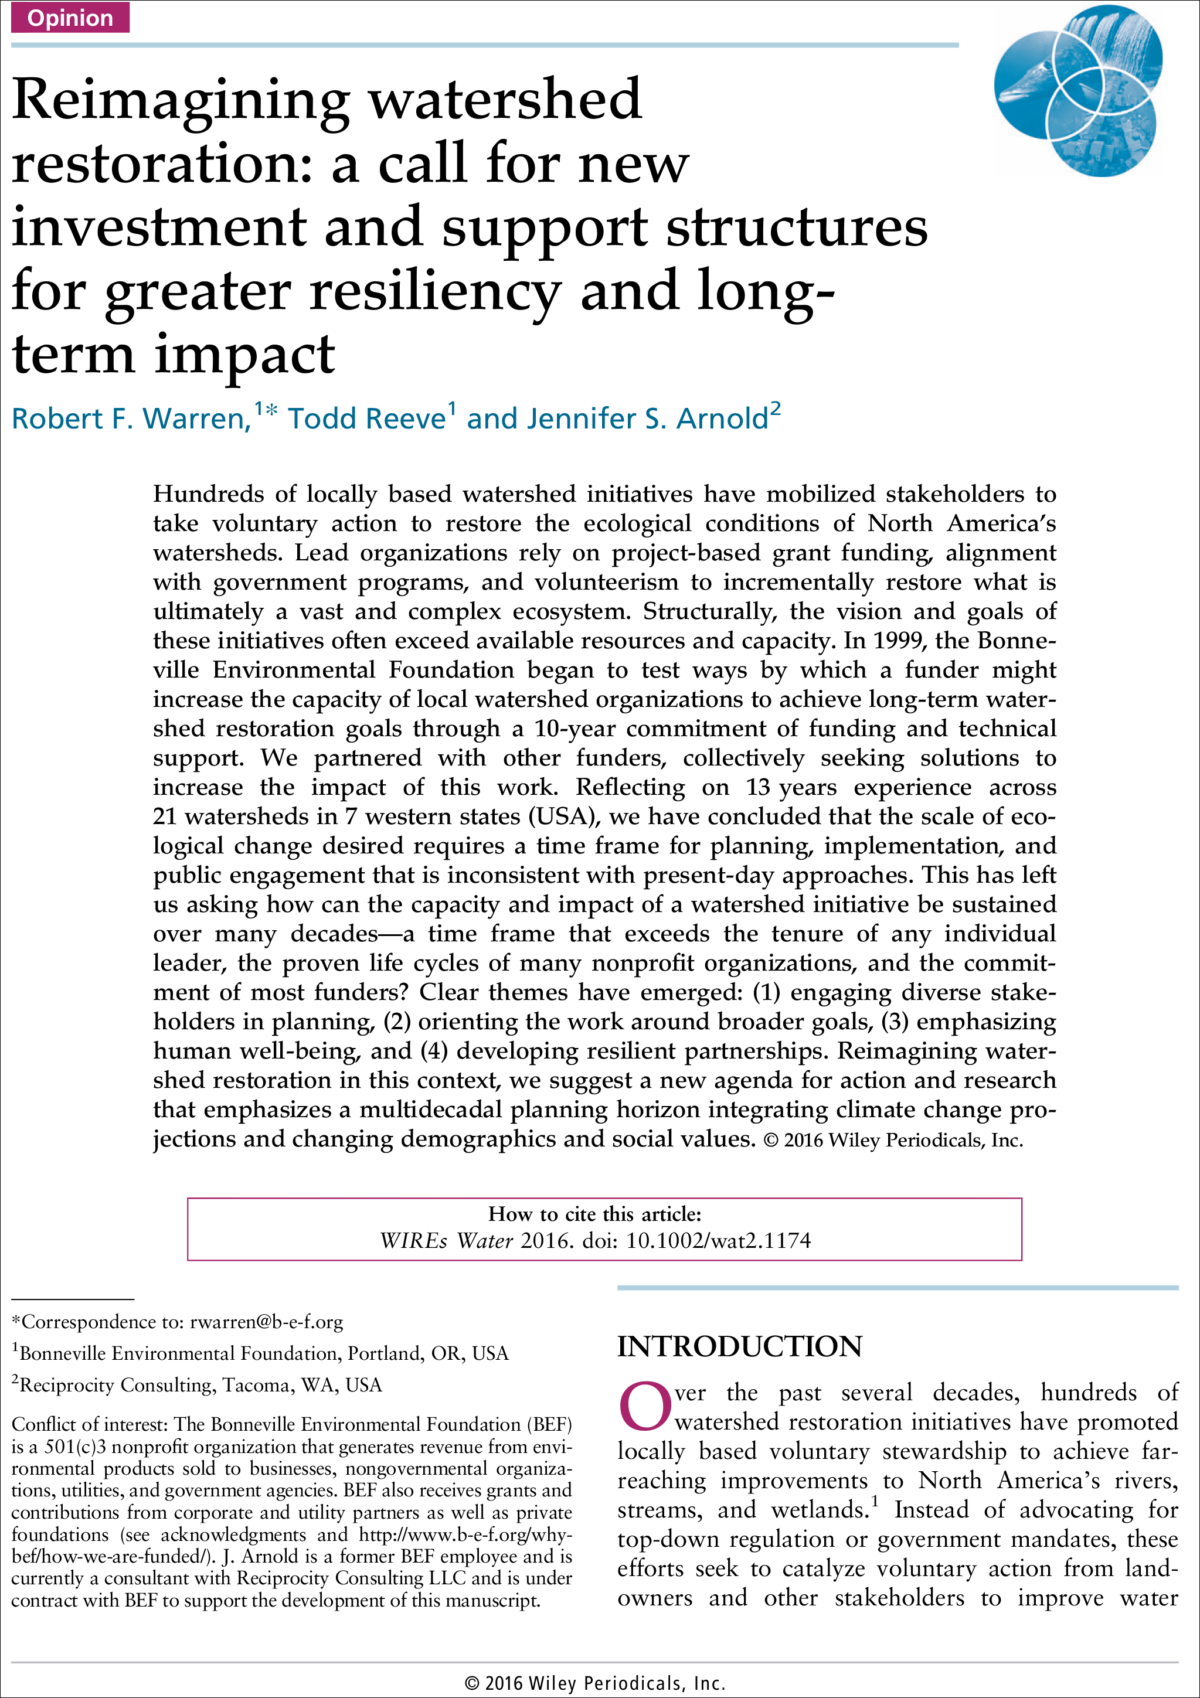 Article: Reimagining watershed restoration: a call for new investment and support structures for greater resiliency and long term impact